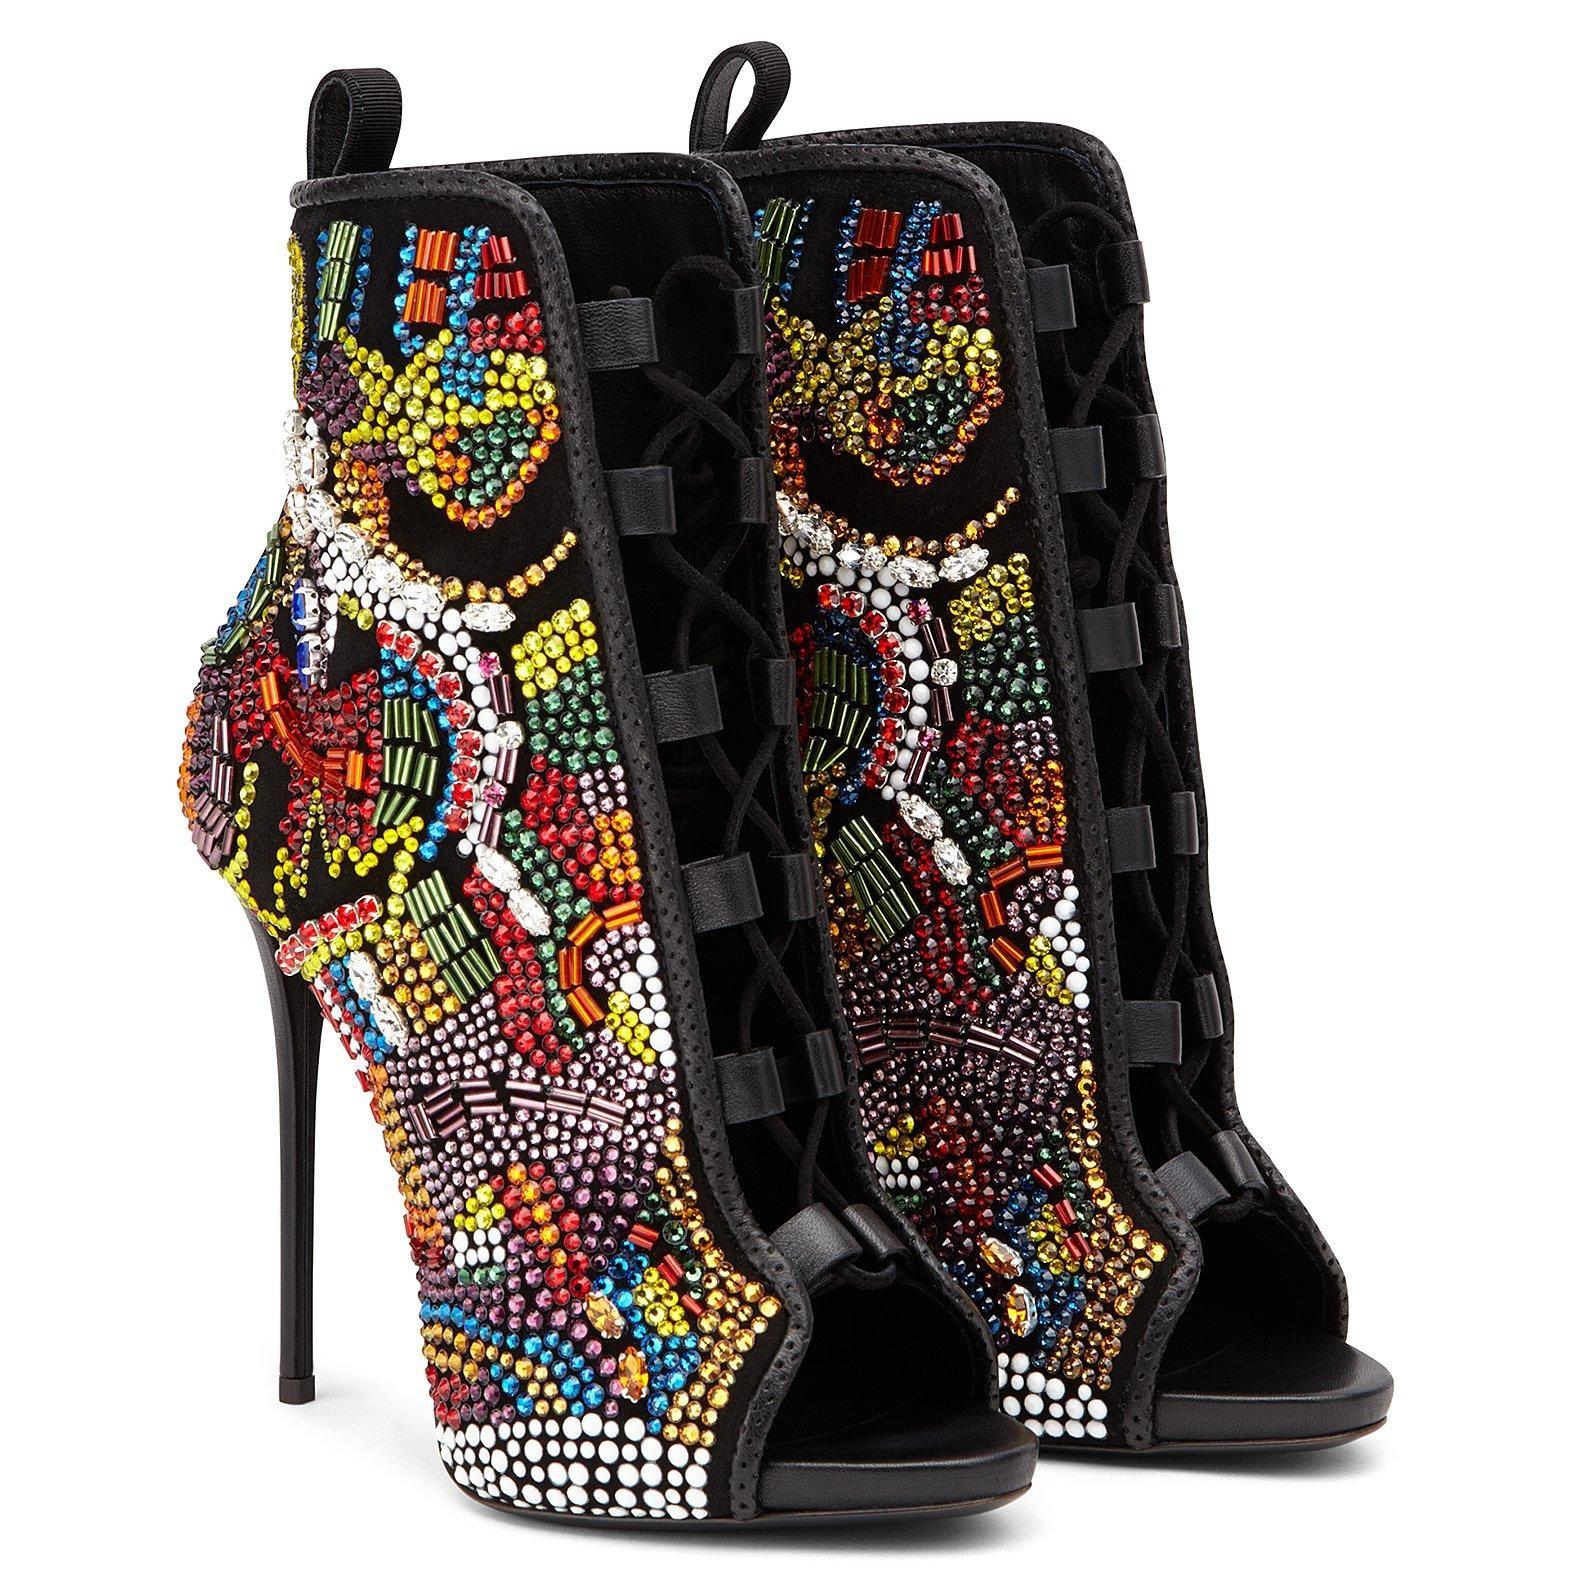 Giuseppe Zanotti NEW Limited Edition Rainbow Crystal Bead Evening Heels Booties in Box

Original purchase price $6,295
Size IT 36
Suede
Crystal
Bead
Made in Italy 
Heel height 4.75